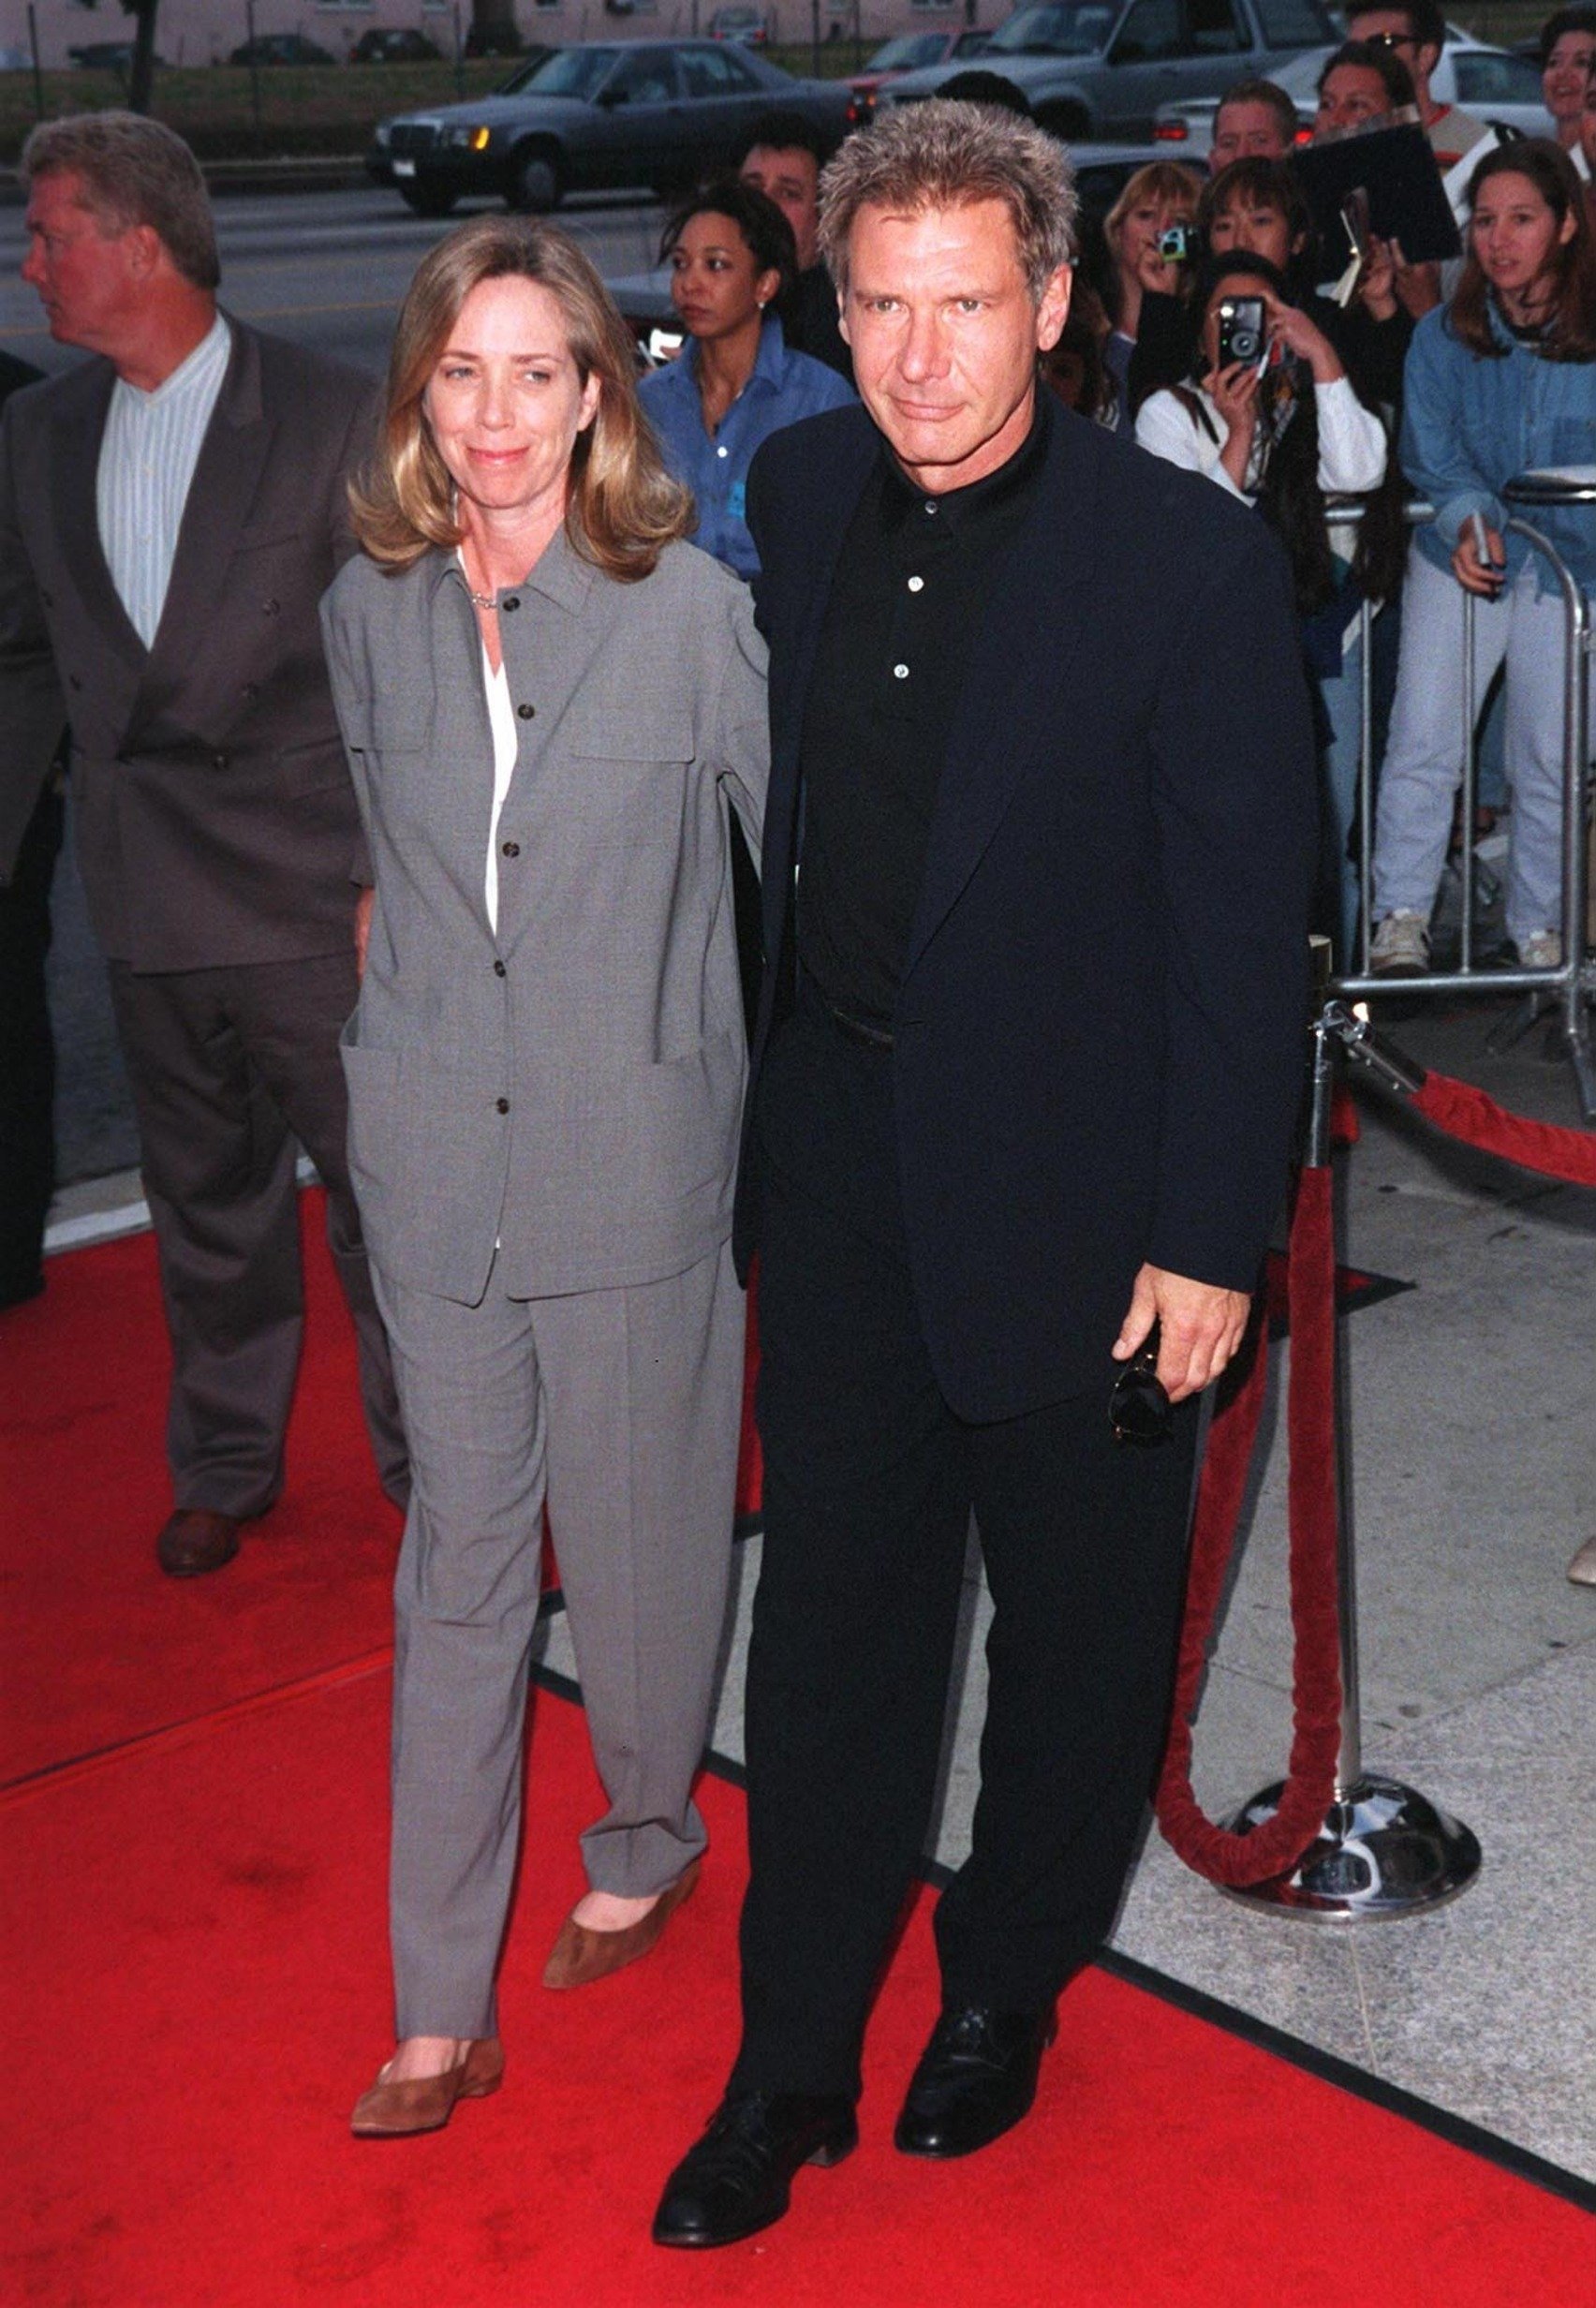 Actors Harrison Ford with his wife Melissa Mathison at premiere of his movie, "Six Days, Seven Nights" on June 8, 1998 | Photo: Shutterstock 